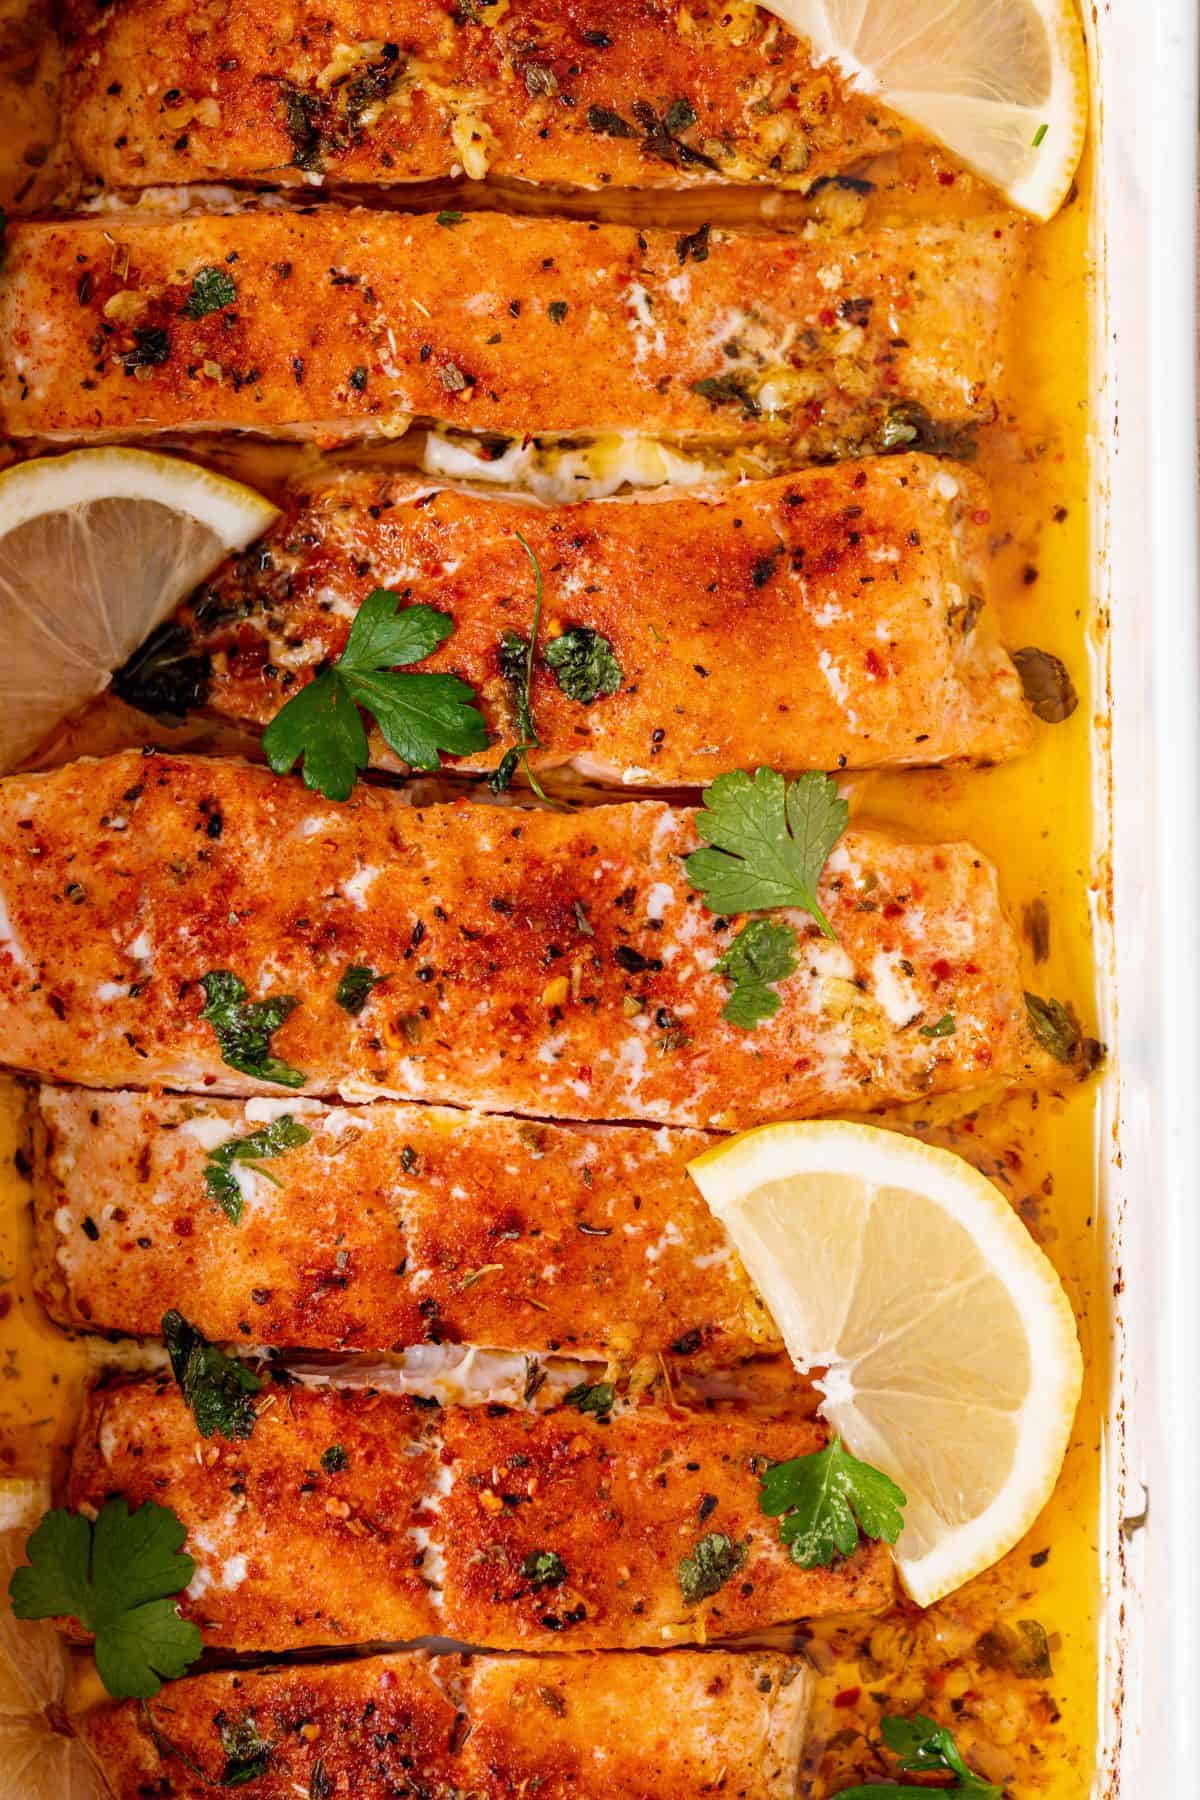 baked salmon in a lemon butter sauce topped with slices of lemon and parsley